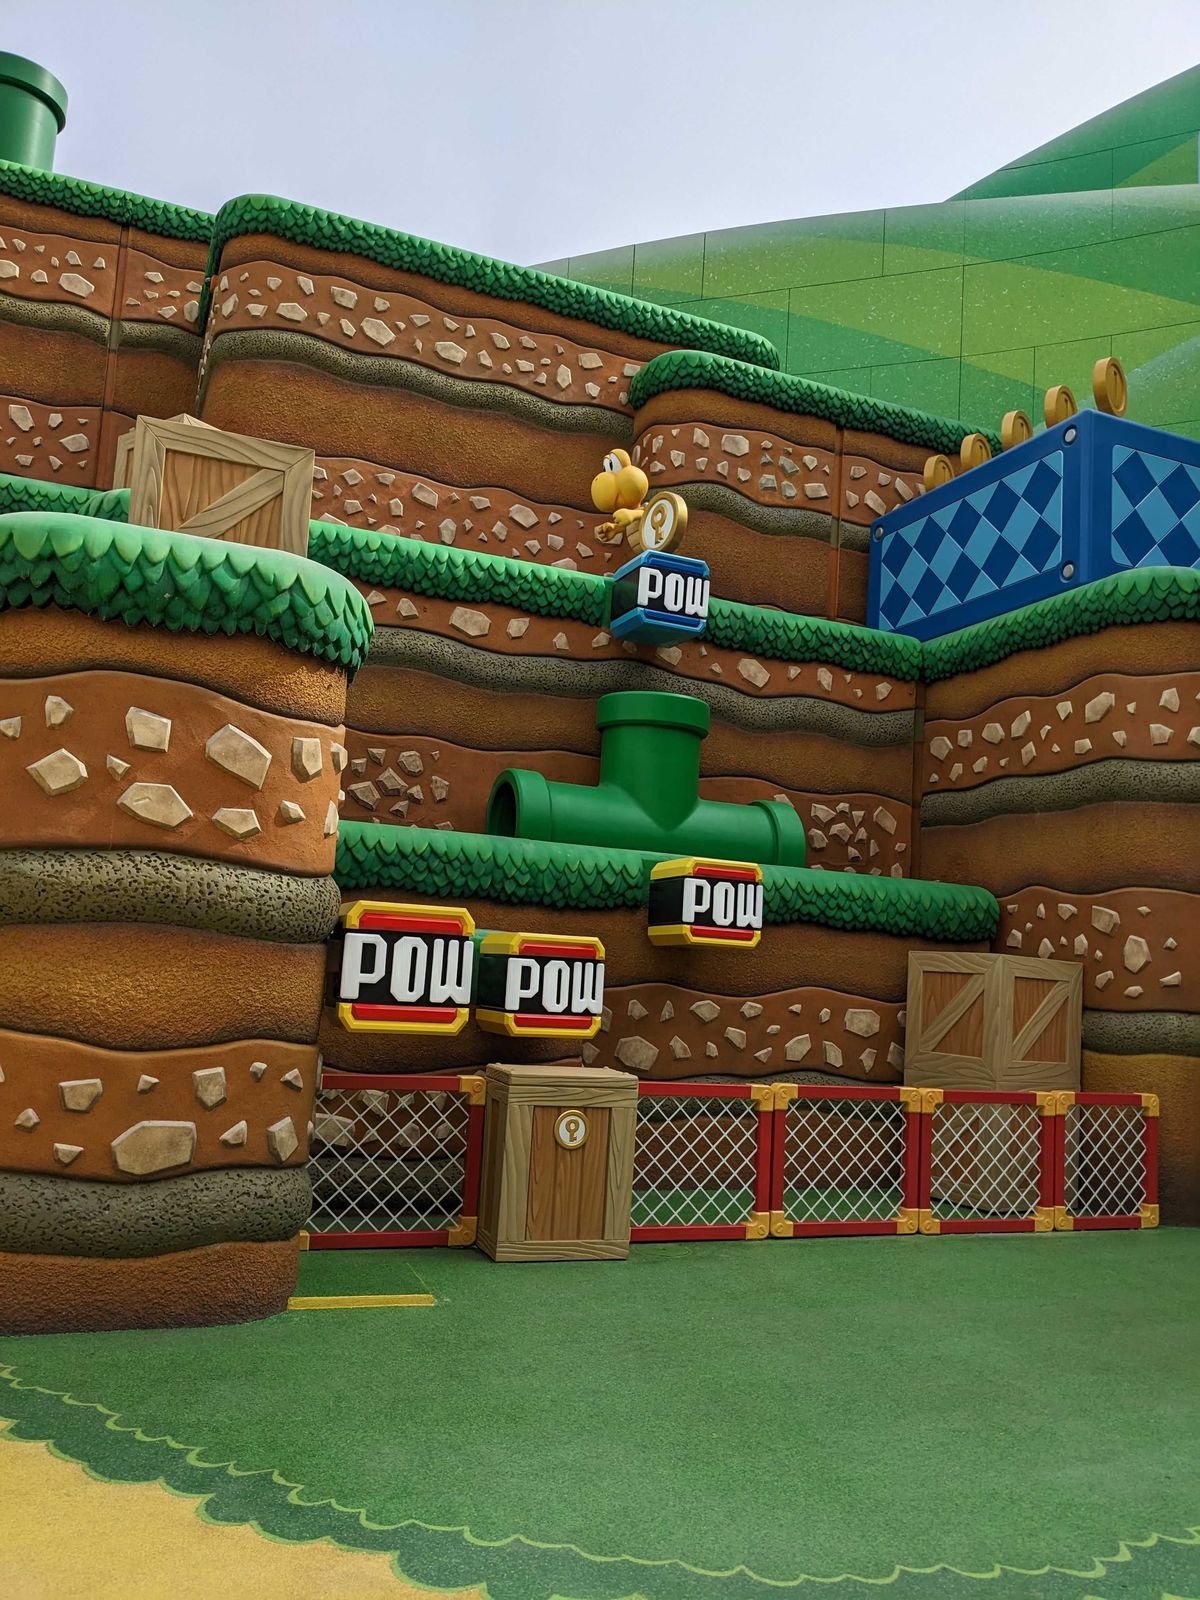 A Koopa stands above a POW button, positioned above a pipe. The activity is part of Super Nintendo World.